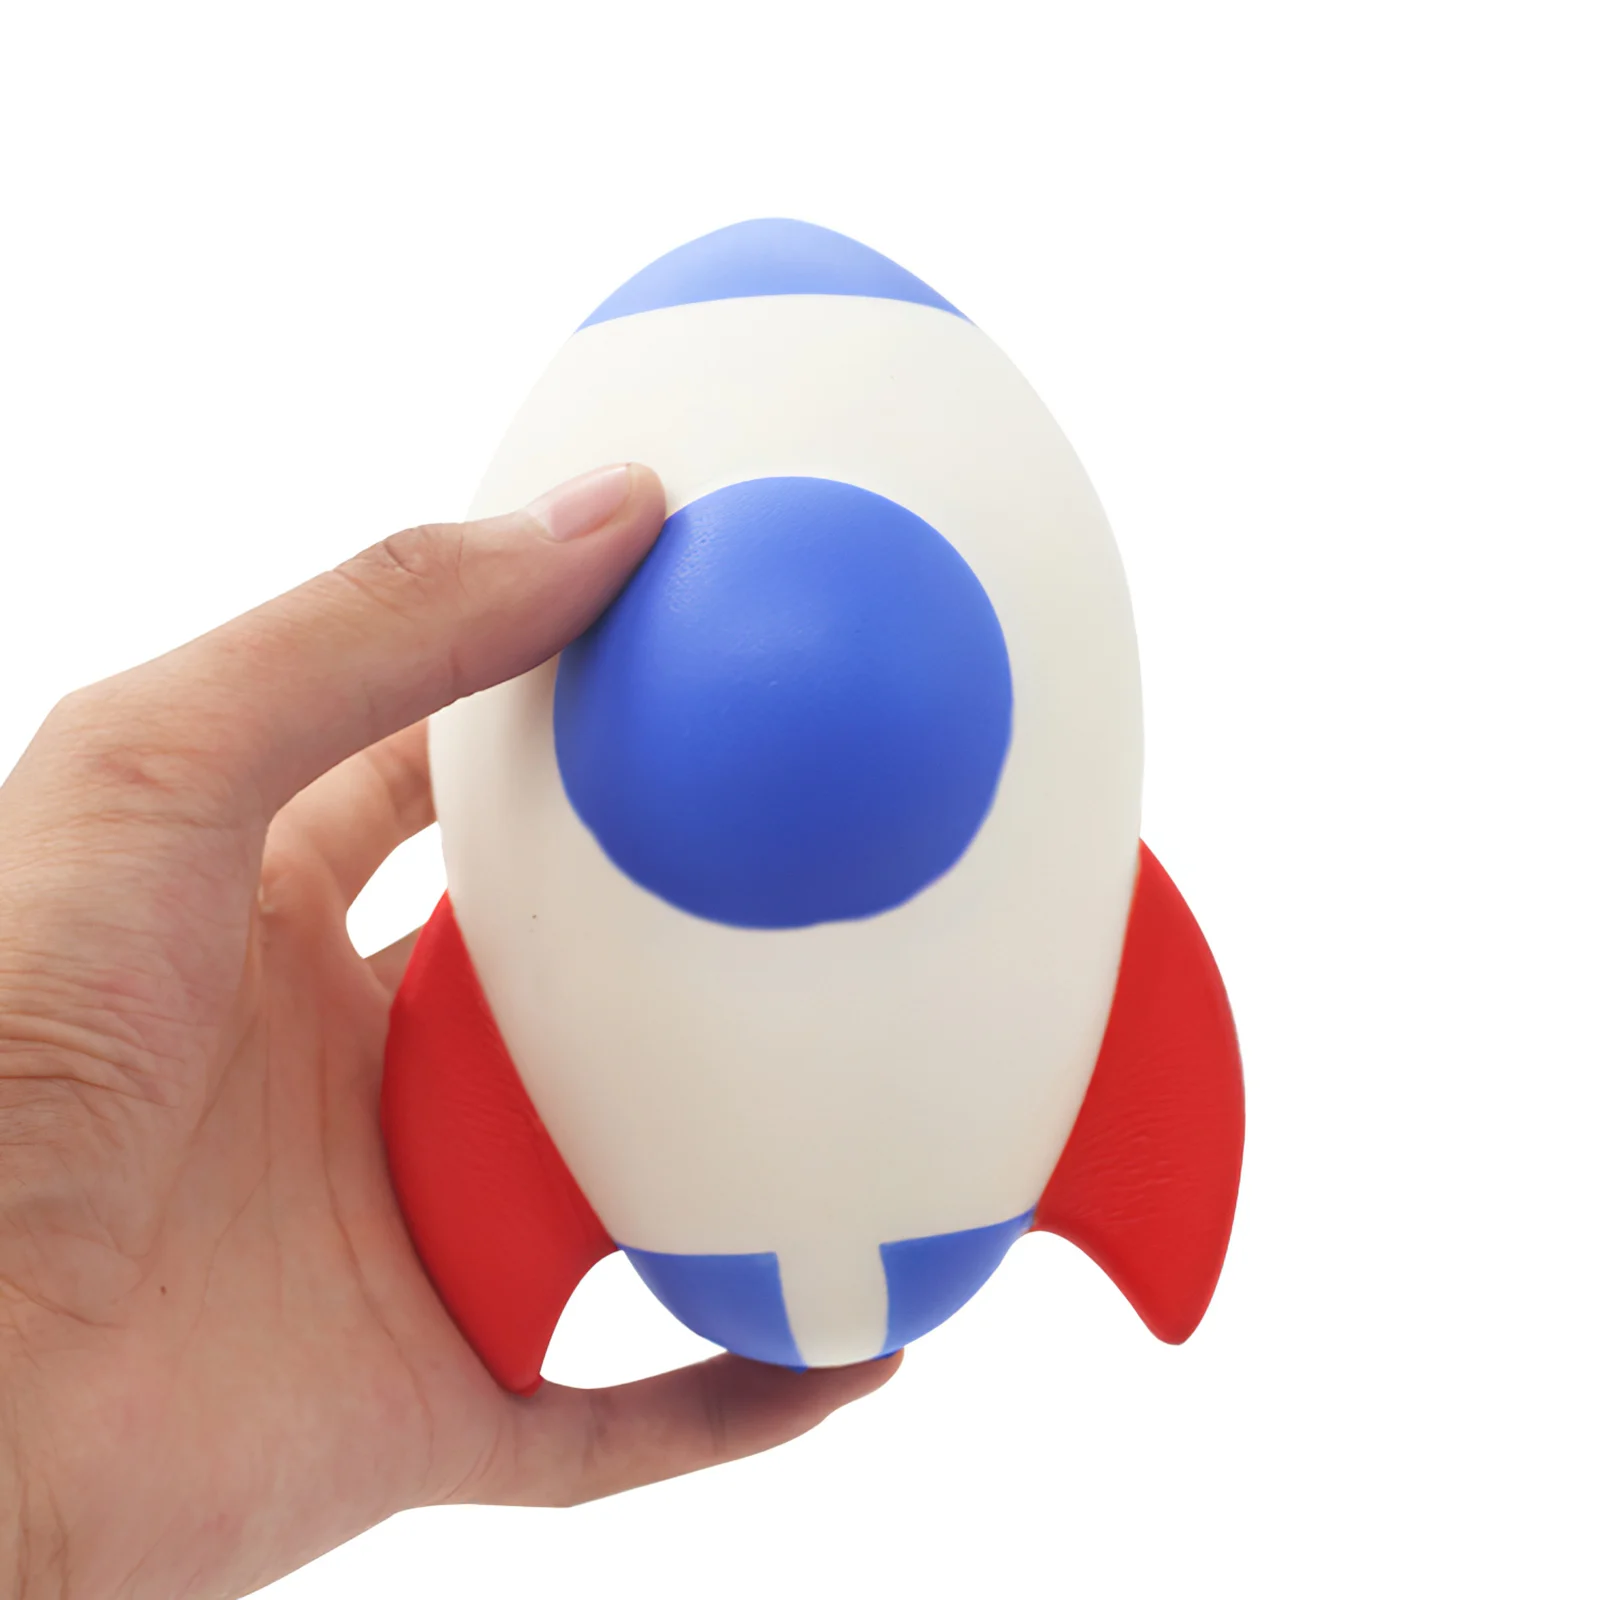 

New Jumbo Rocket Squishy Simulation Fashion Slow Rising Soft Bread Cake Squeeze Toy Stress Relief Fun For Kid Gift